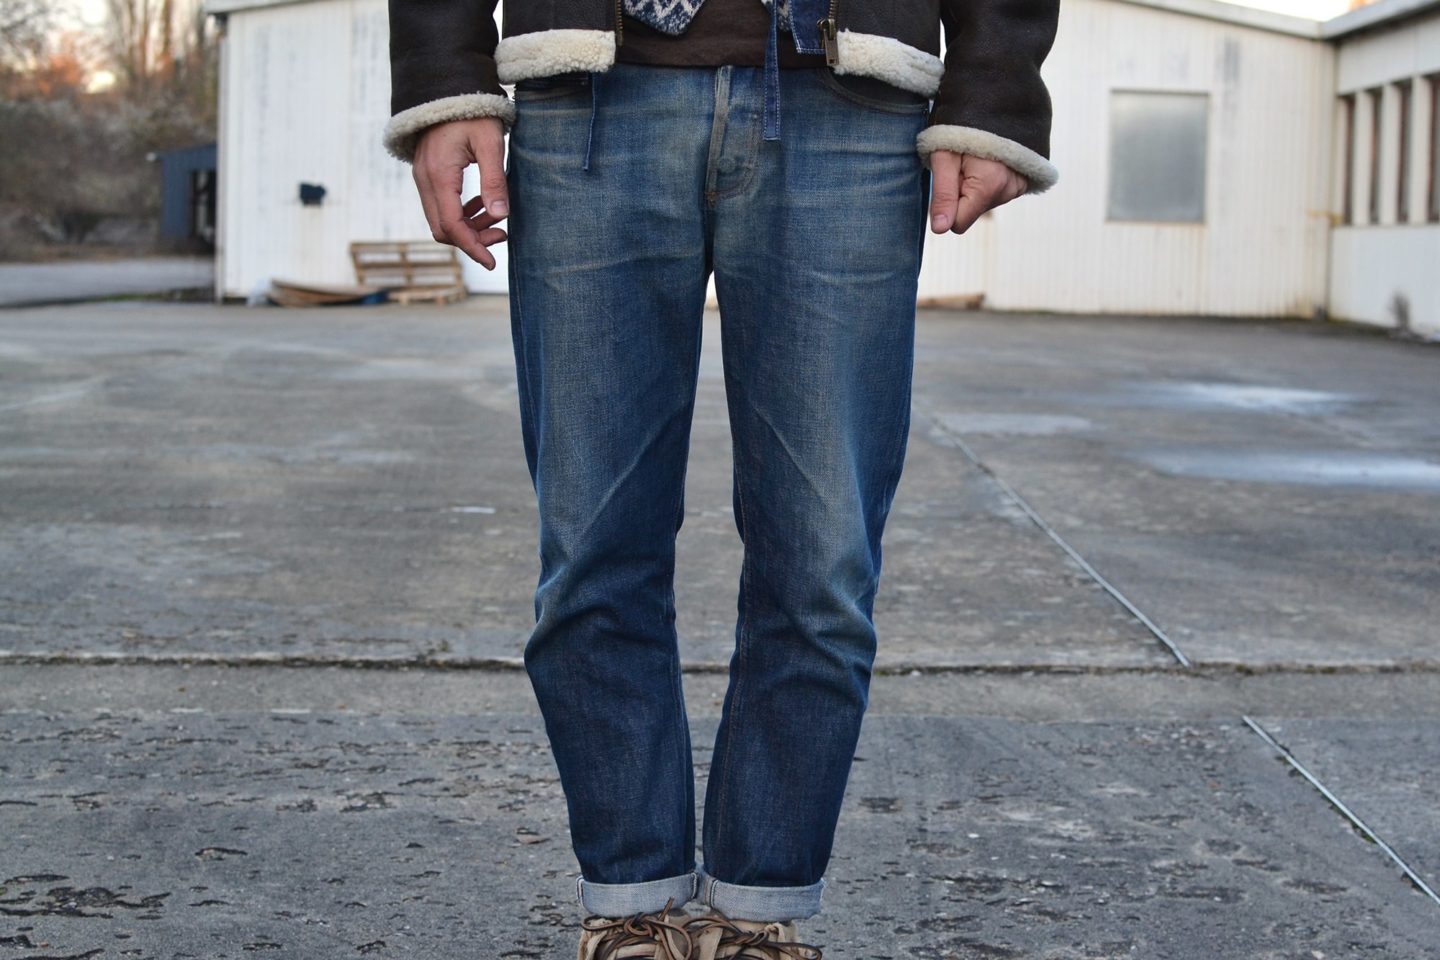 Jeans A.P.C Rescue Custom tapered with sneakers Visvim FBT lhamo color sand